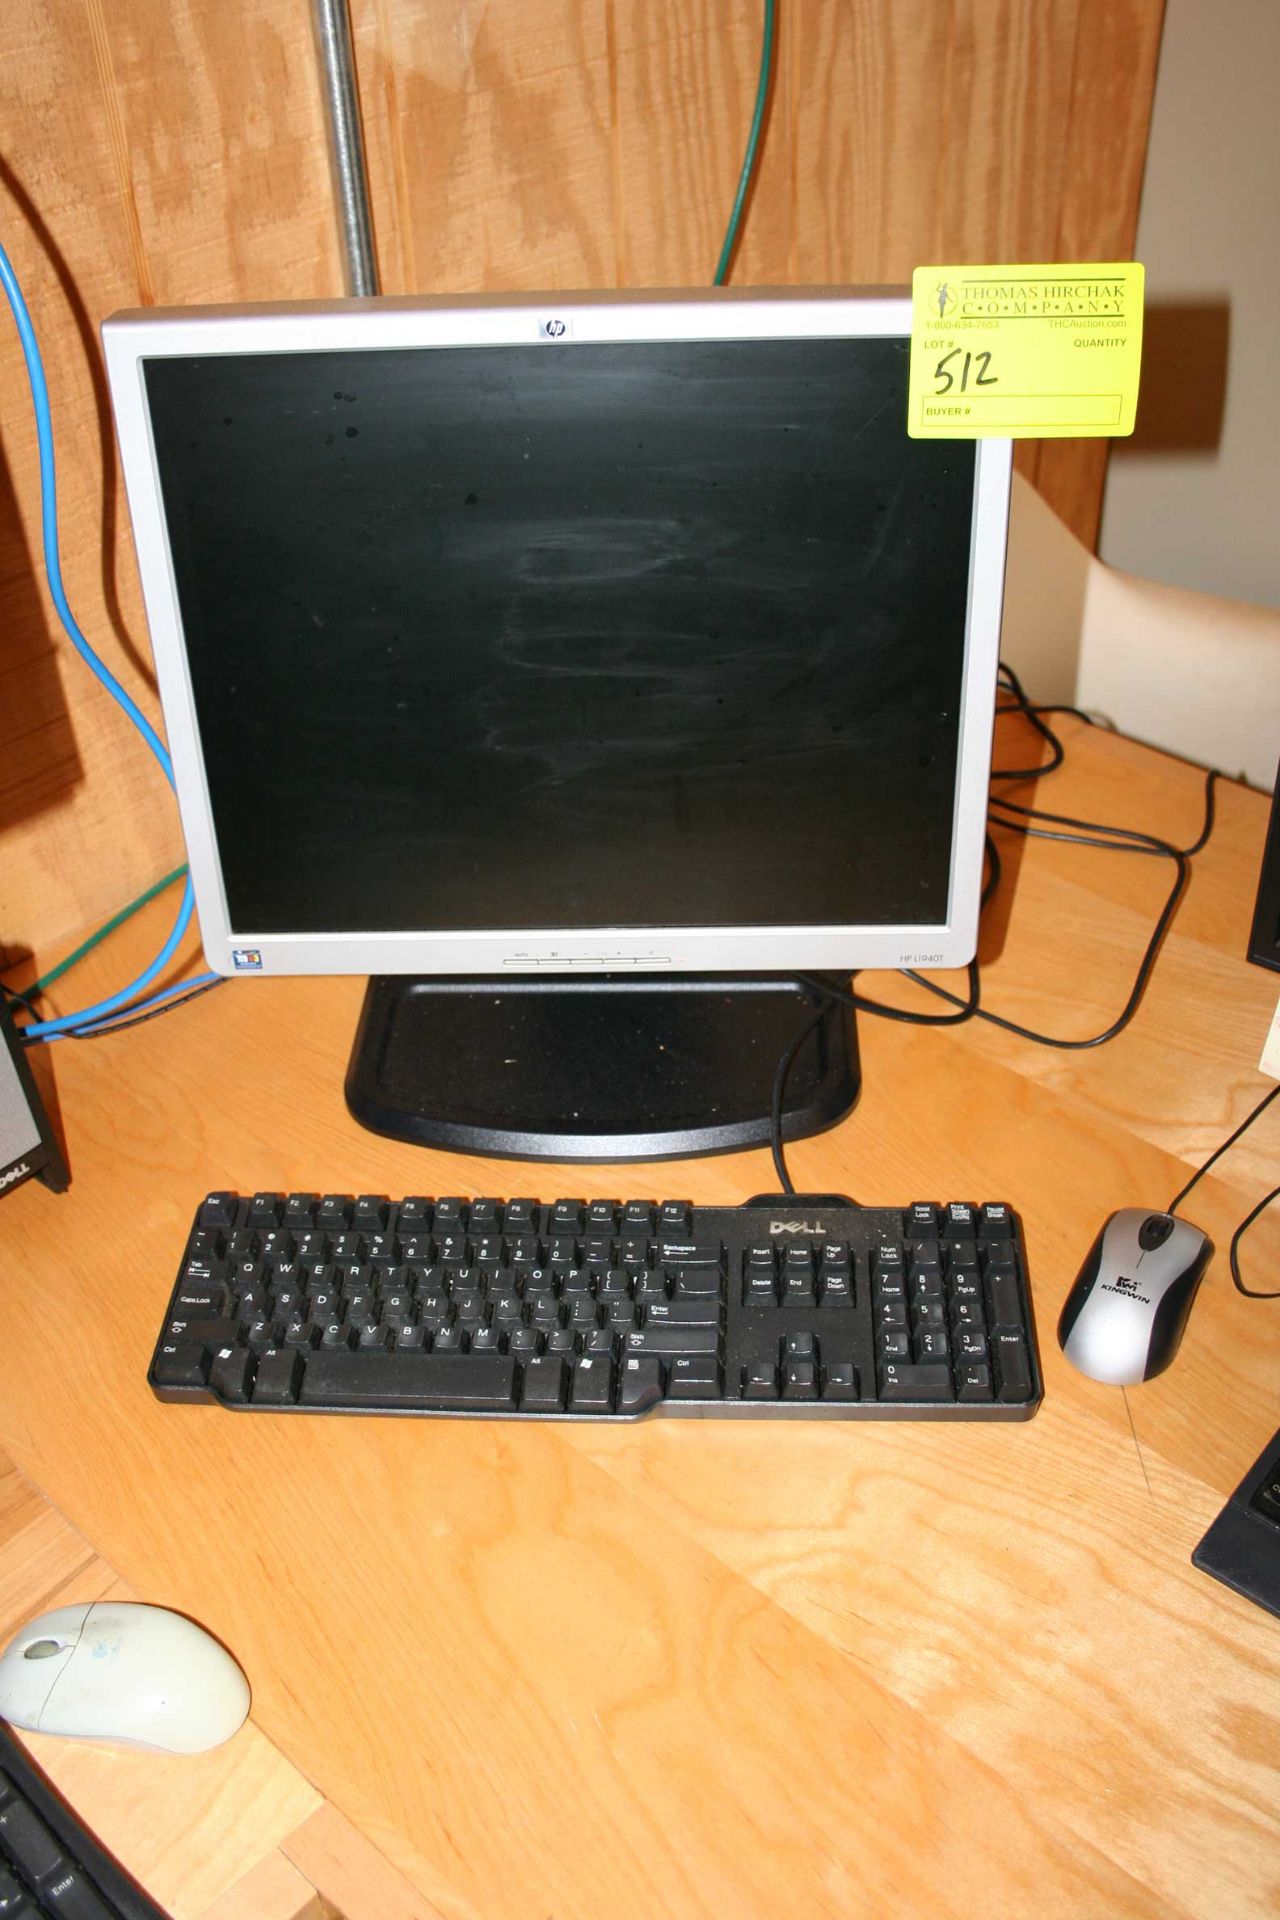 Dell Precision 690 PC w/ HP 1940 monitor, keyboard, mouse